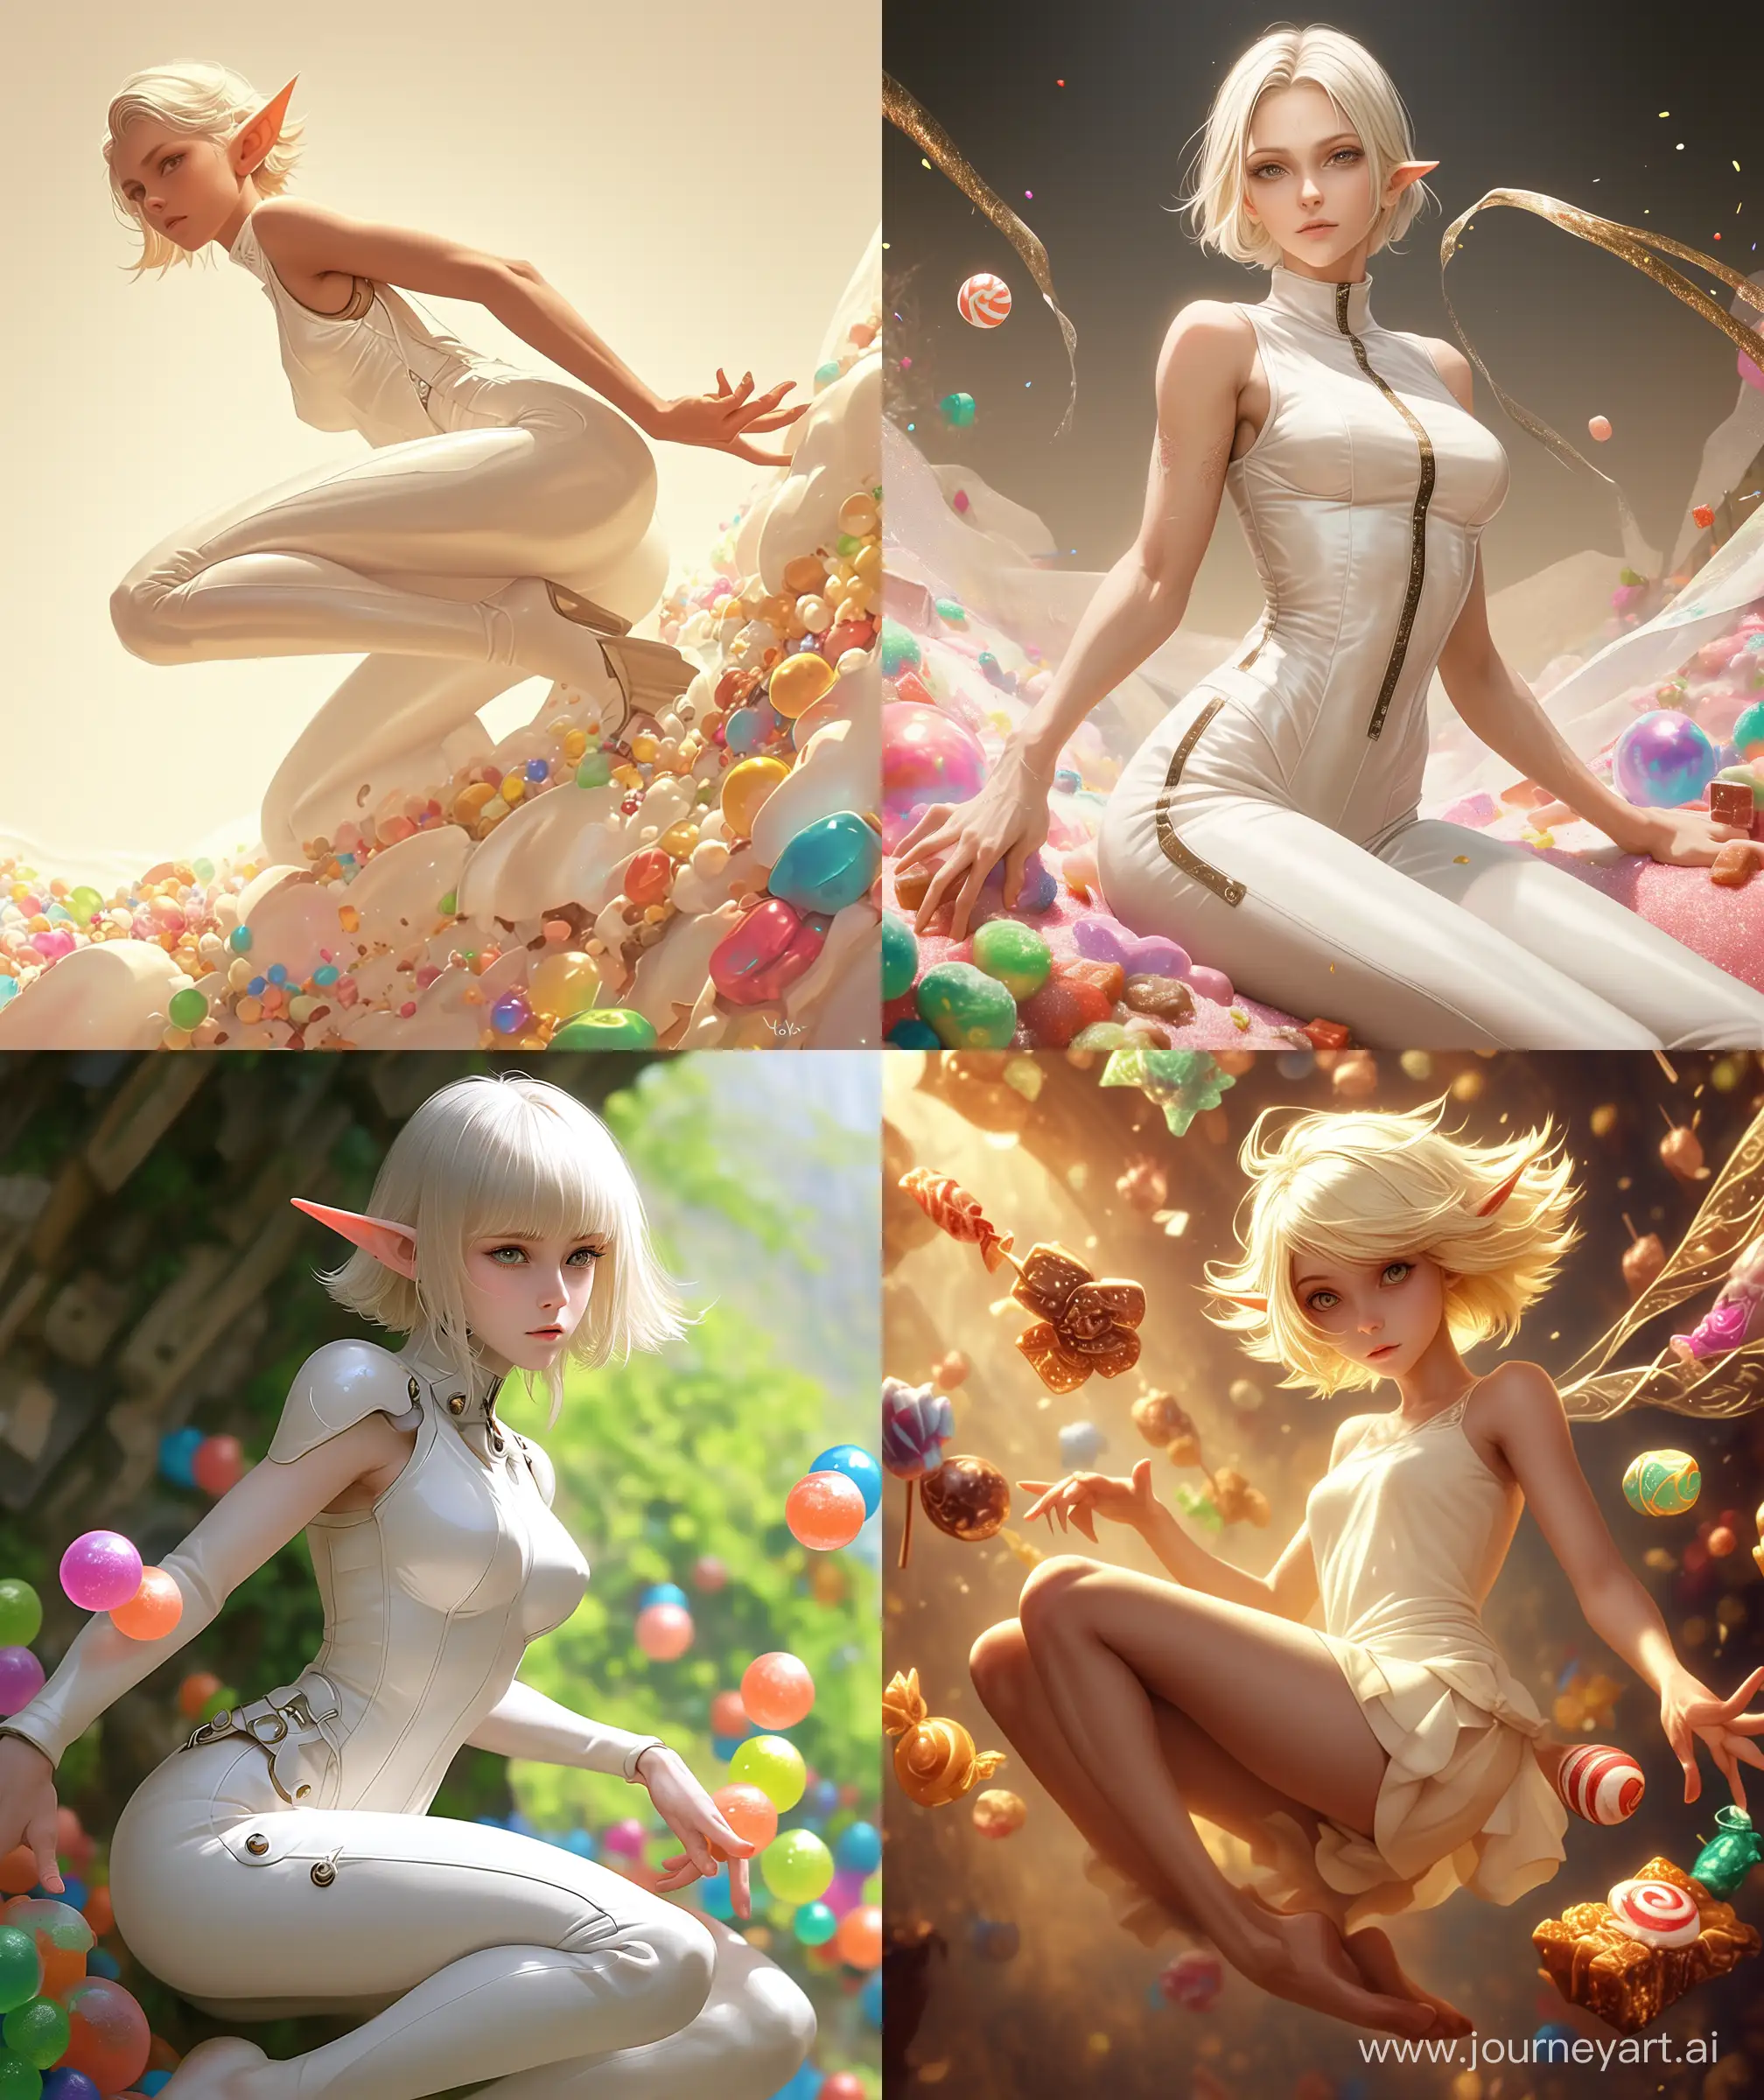 Elegant-Tan-Elf-Woman-Rolling-Over-Soft-Quilt-Amidst-Candy-Delight